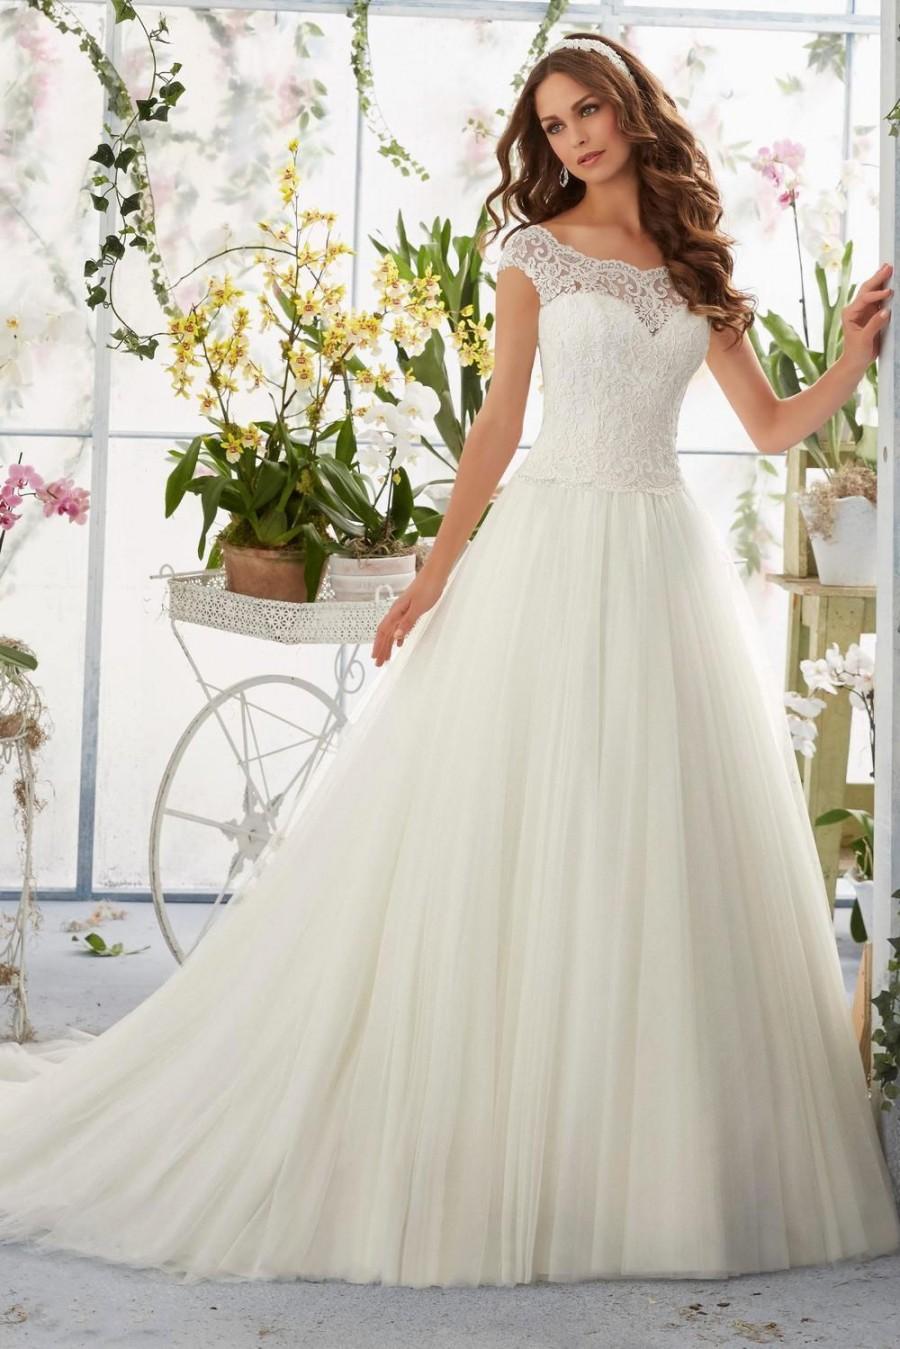 Mariage - 2016 Chic A-Line Sleeveless Wedding Dresses Bateau Court Train V-Back Dropped Waist Covered Button Tulle With Applique Online with $121.73/Piece on Hjklp88's Store 